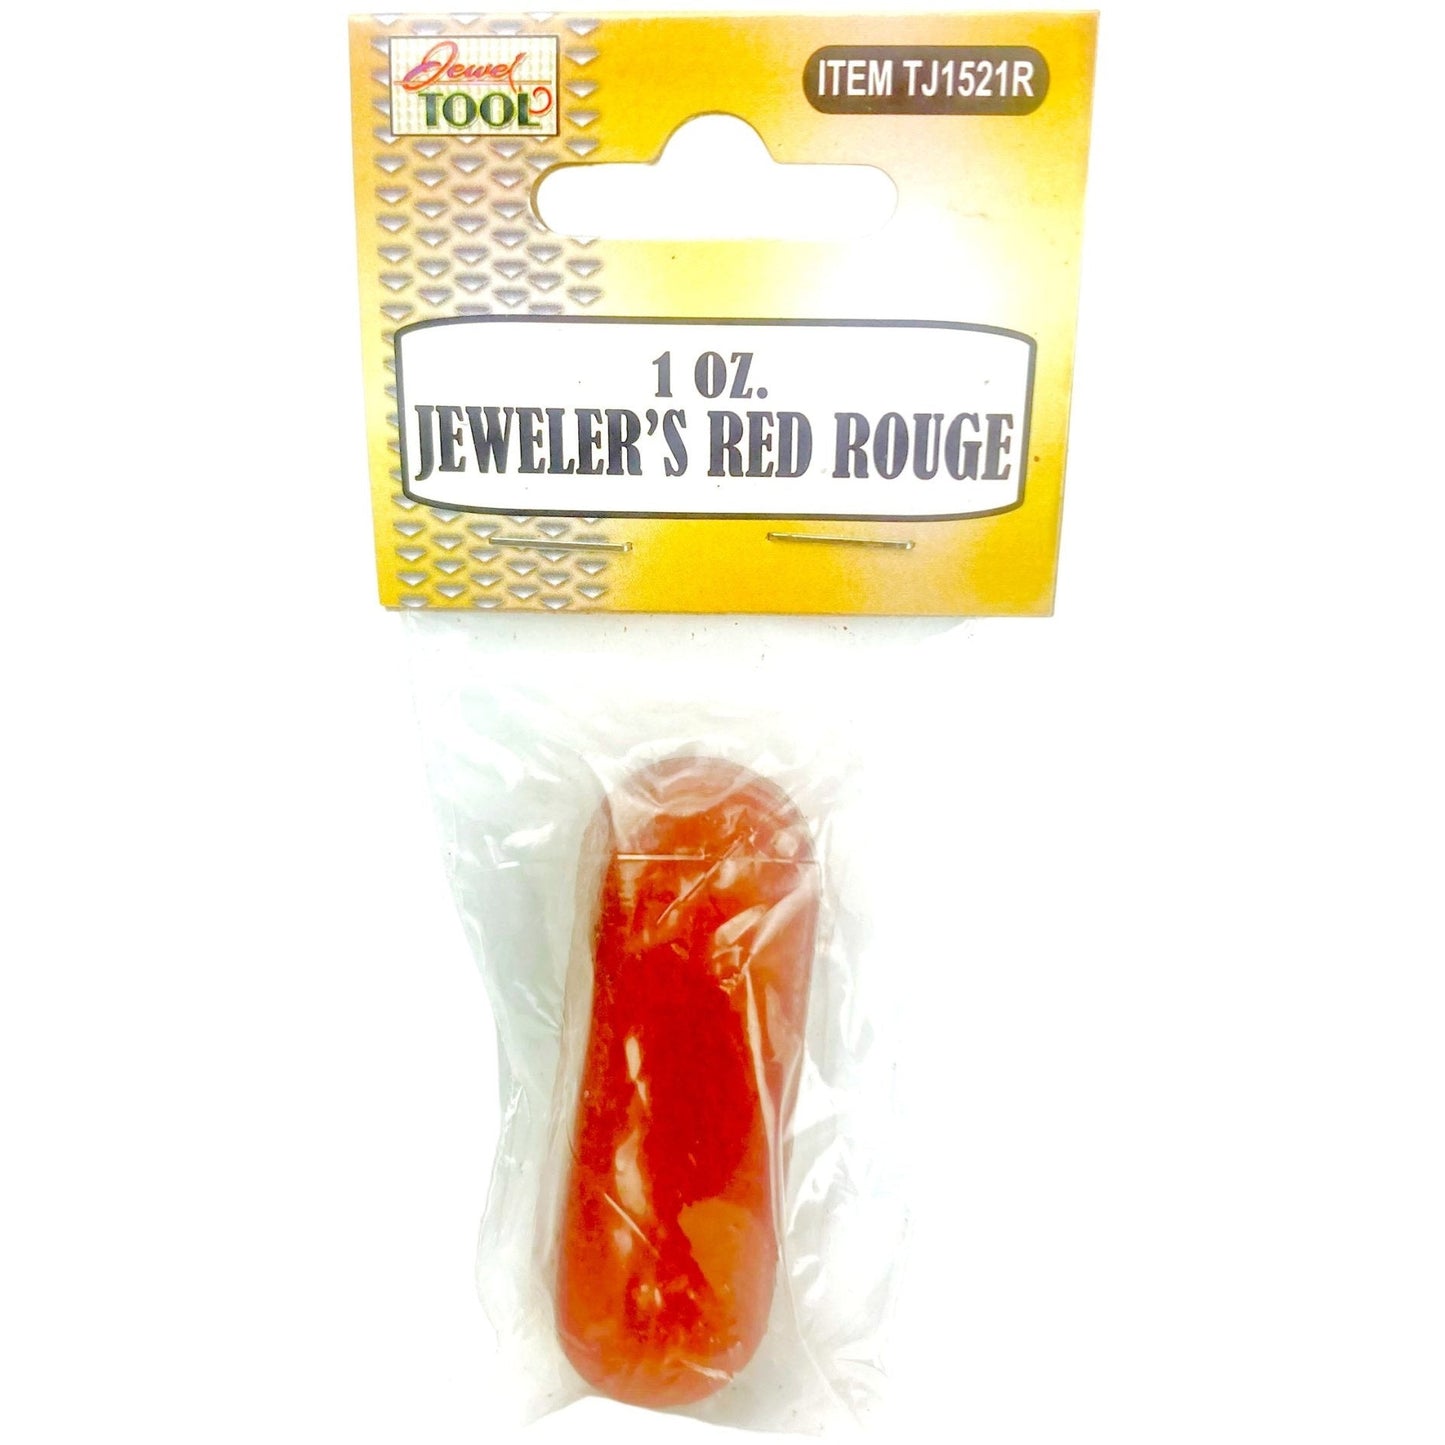 1 Oz. Jeweler's Red Rouge - ToolUSA